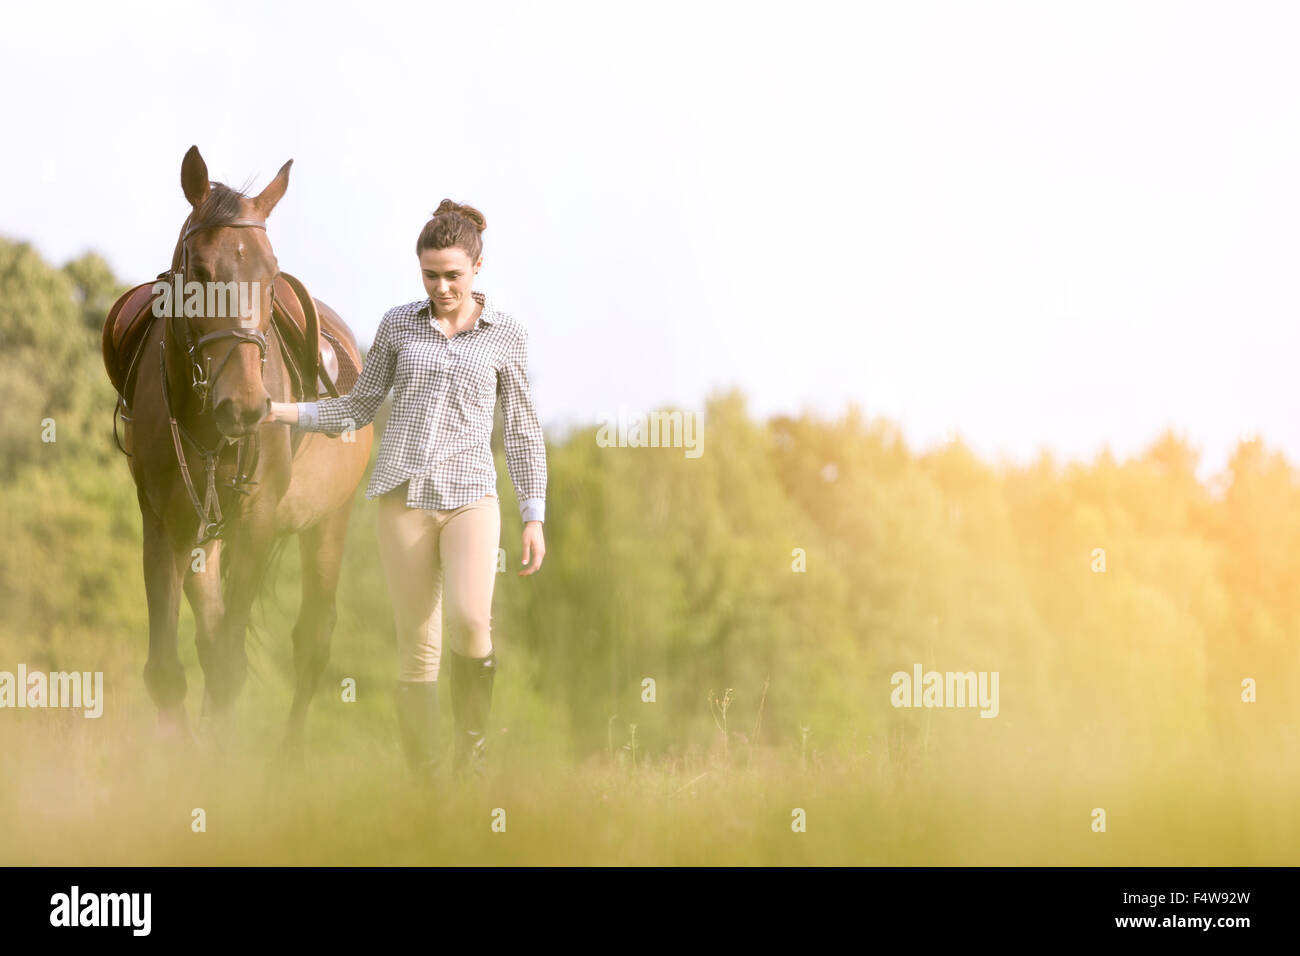 Woman walking horse in rural field Banque D'Images